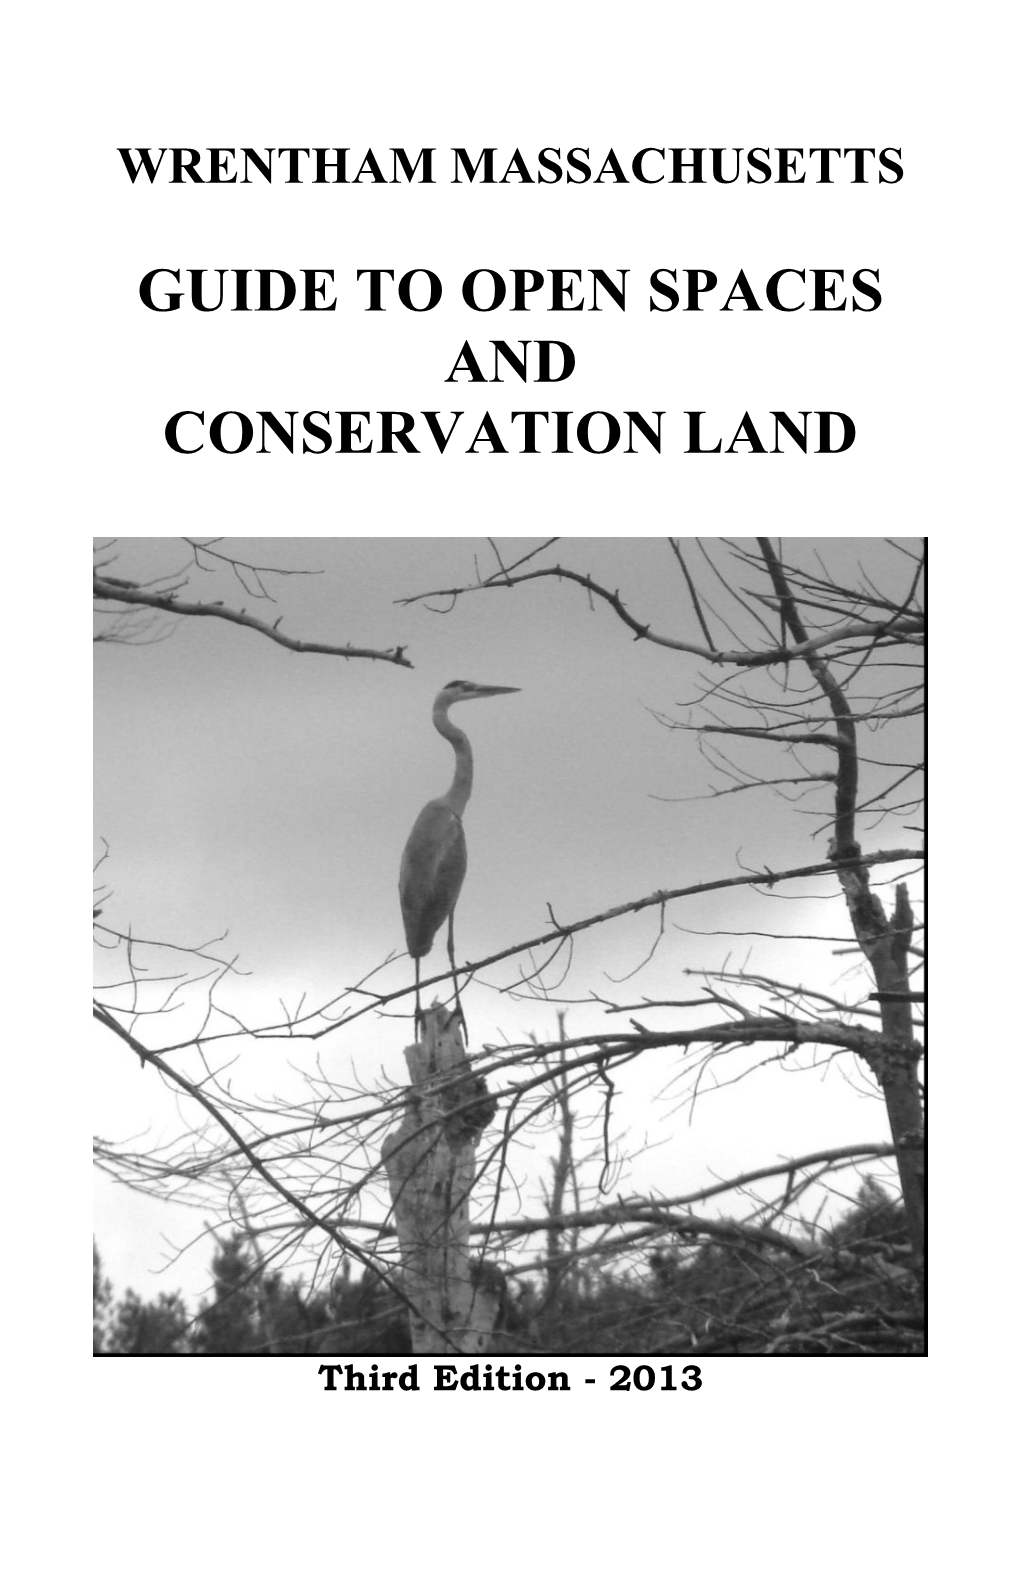 Guide to Open Spaces and Conservation Land